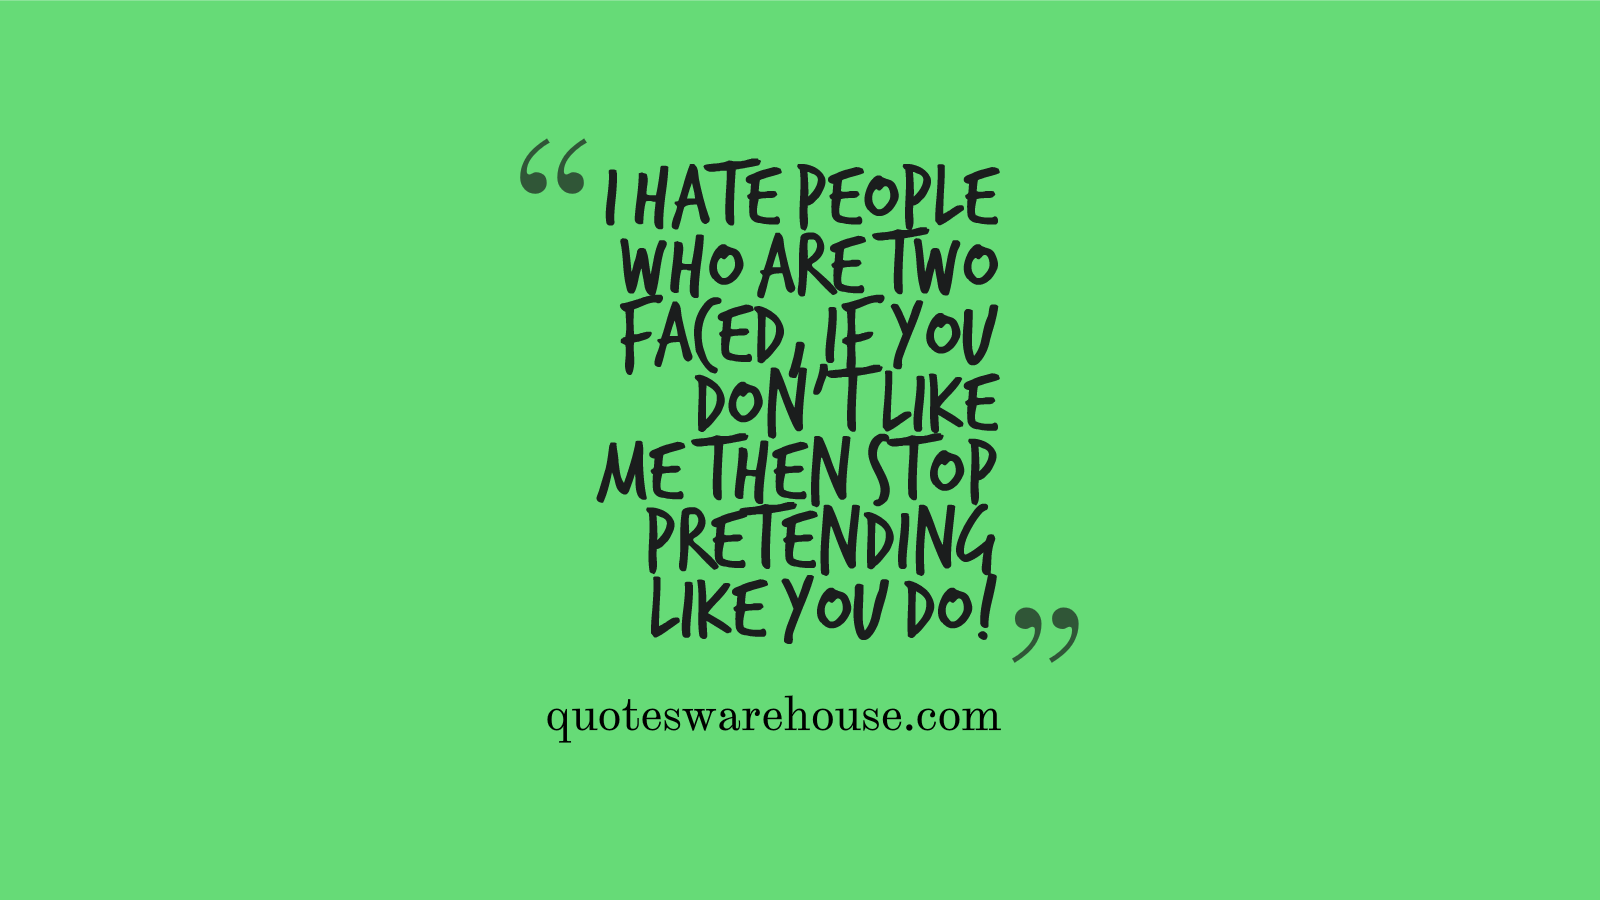 Stop Hating Quotes For Facebook. QuotesGram